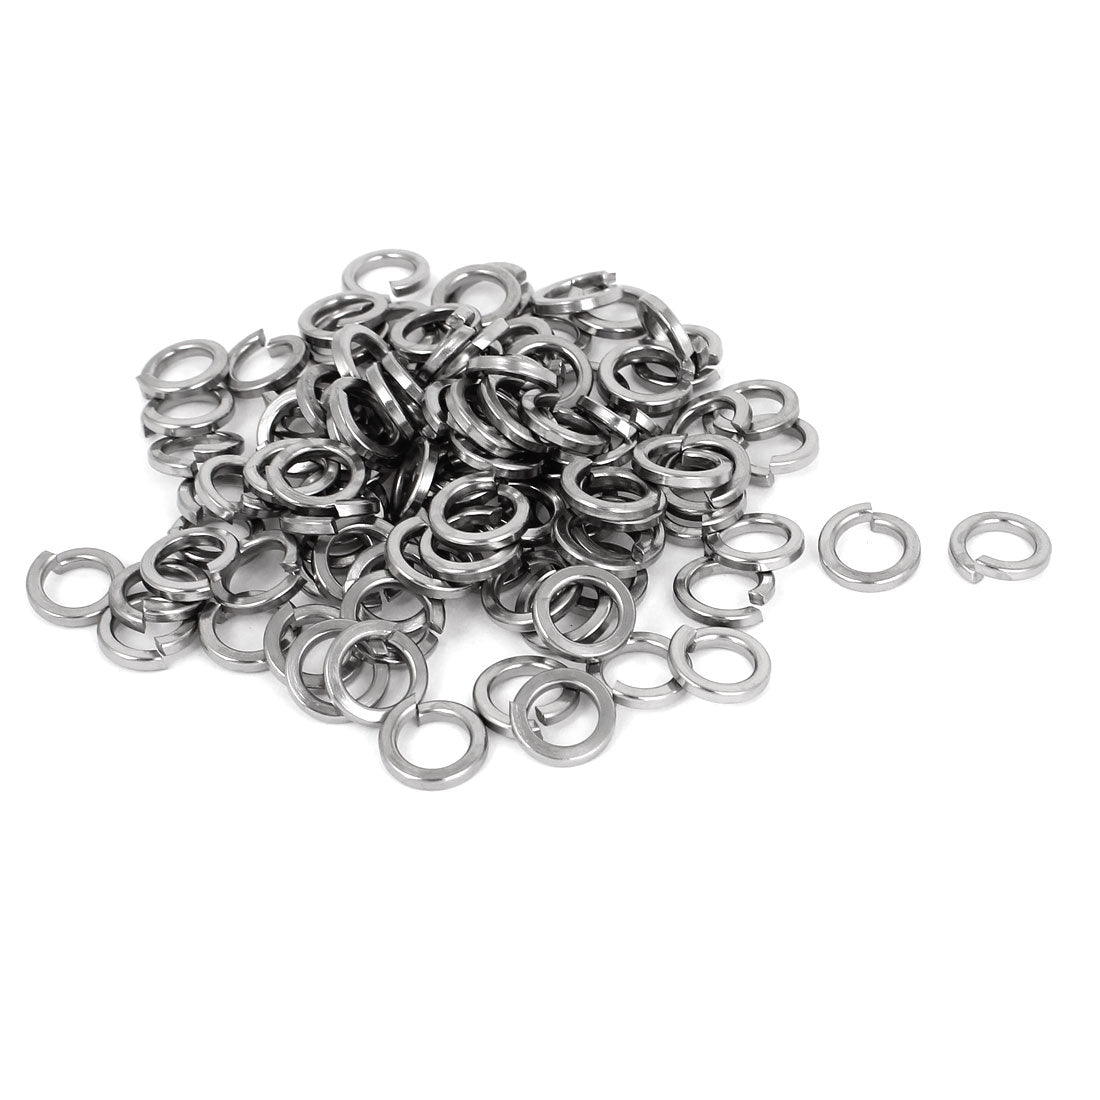 uxcell Uxcell 100pcs 304 Stainless Steel Split Lock Spring Washers 5/16" Screw Spacer Pad